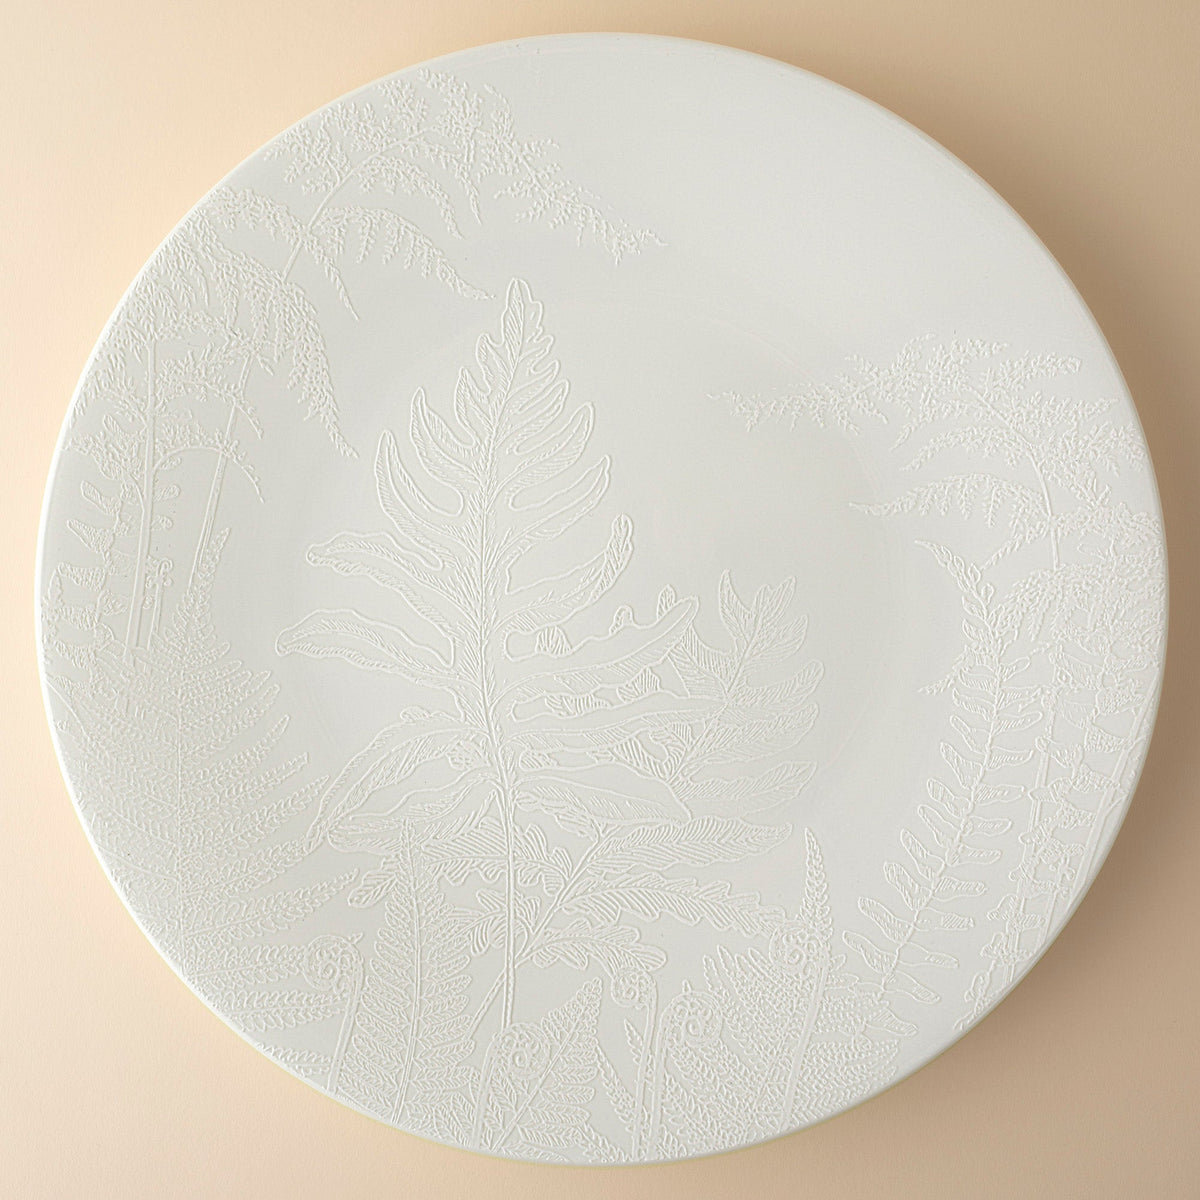 Spring White on White Porcelain Coupe Platter from Caskata features ferns and Flowers in raised glazes 